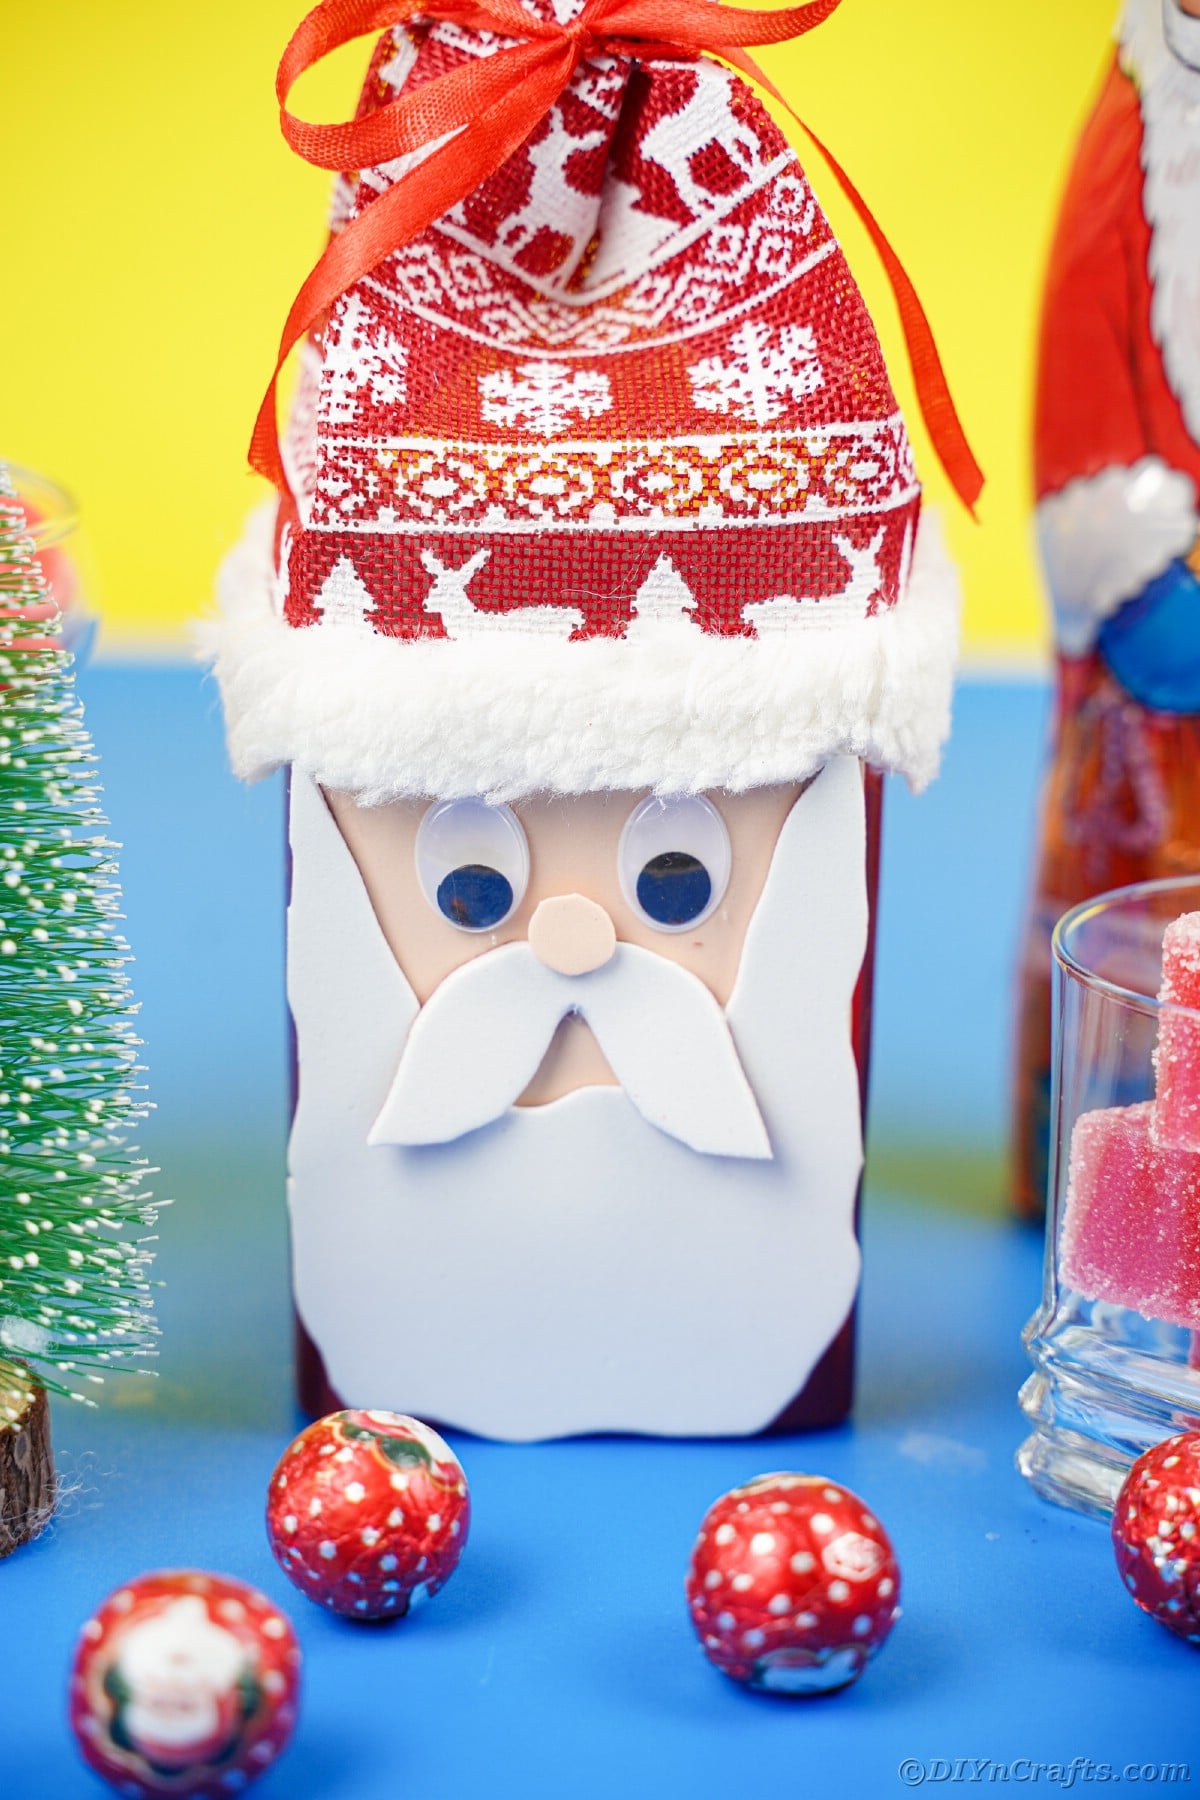 santa claus candy box with ball candies in front sitting on blue table